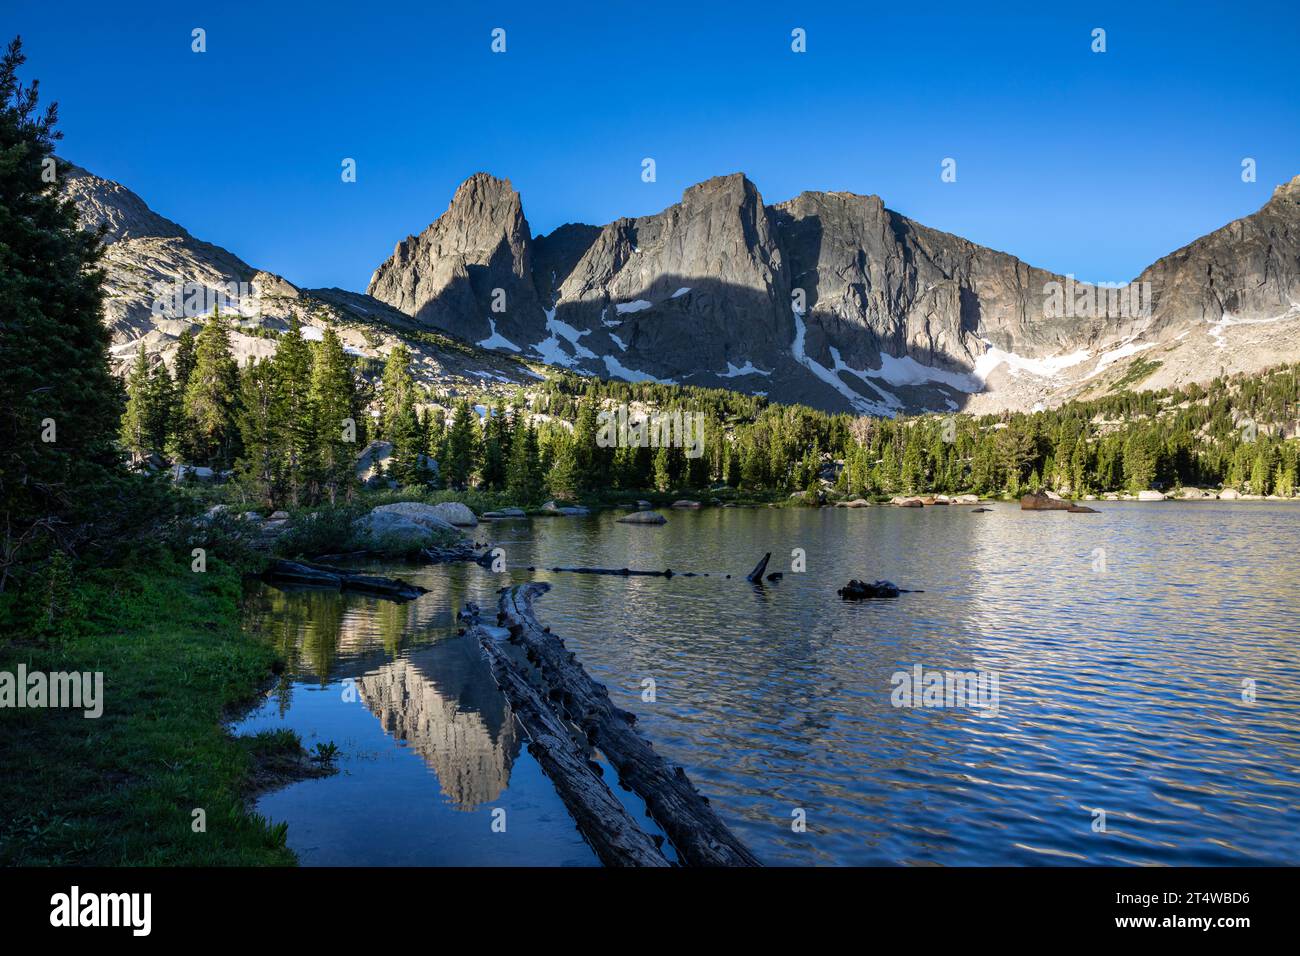 WY05560-00...WYOMING - Warbonnet Peak reflecting in Lonesome Lake, part of the Cirque of the Towers in the Popo Agie Wilderness. Stock Photo